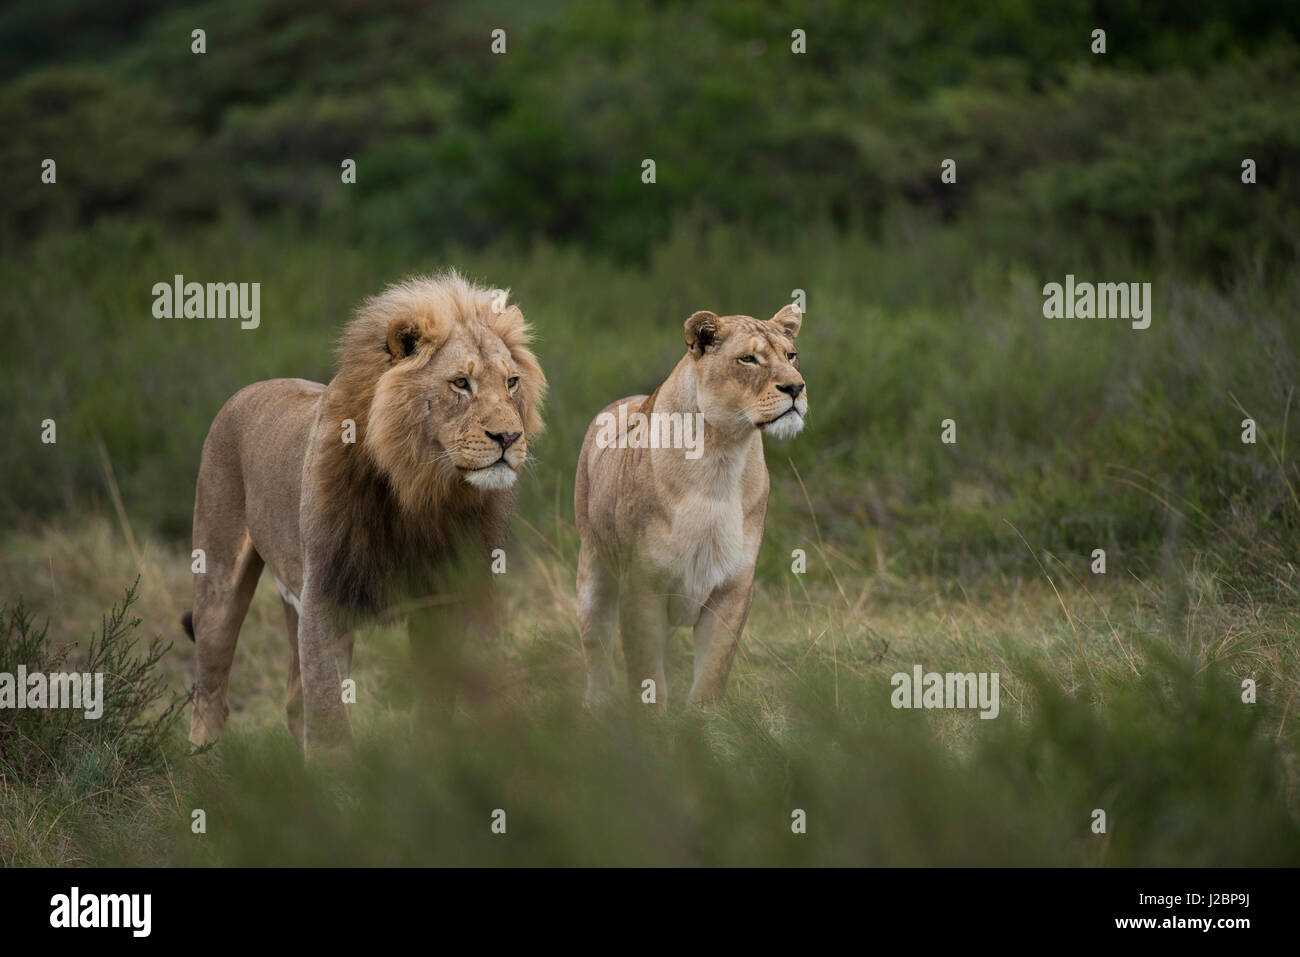 White lion (Panthera Leo) lion with half white genes, Inkwenkwezi Private Game Reserve, Eastern Cape, South Africa, captive Stock Photo